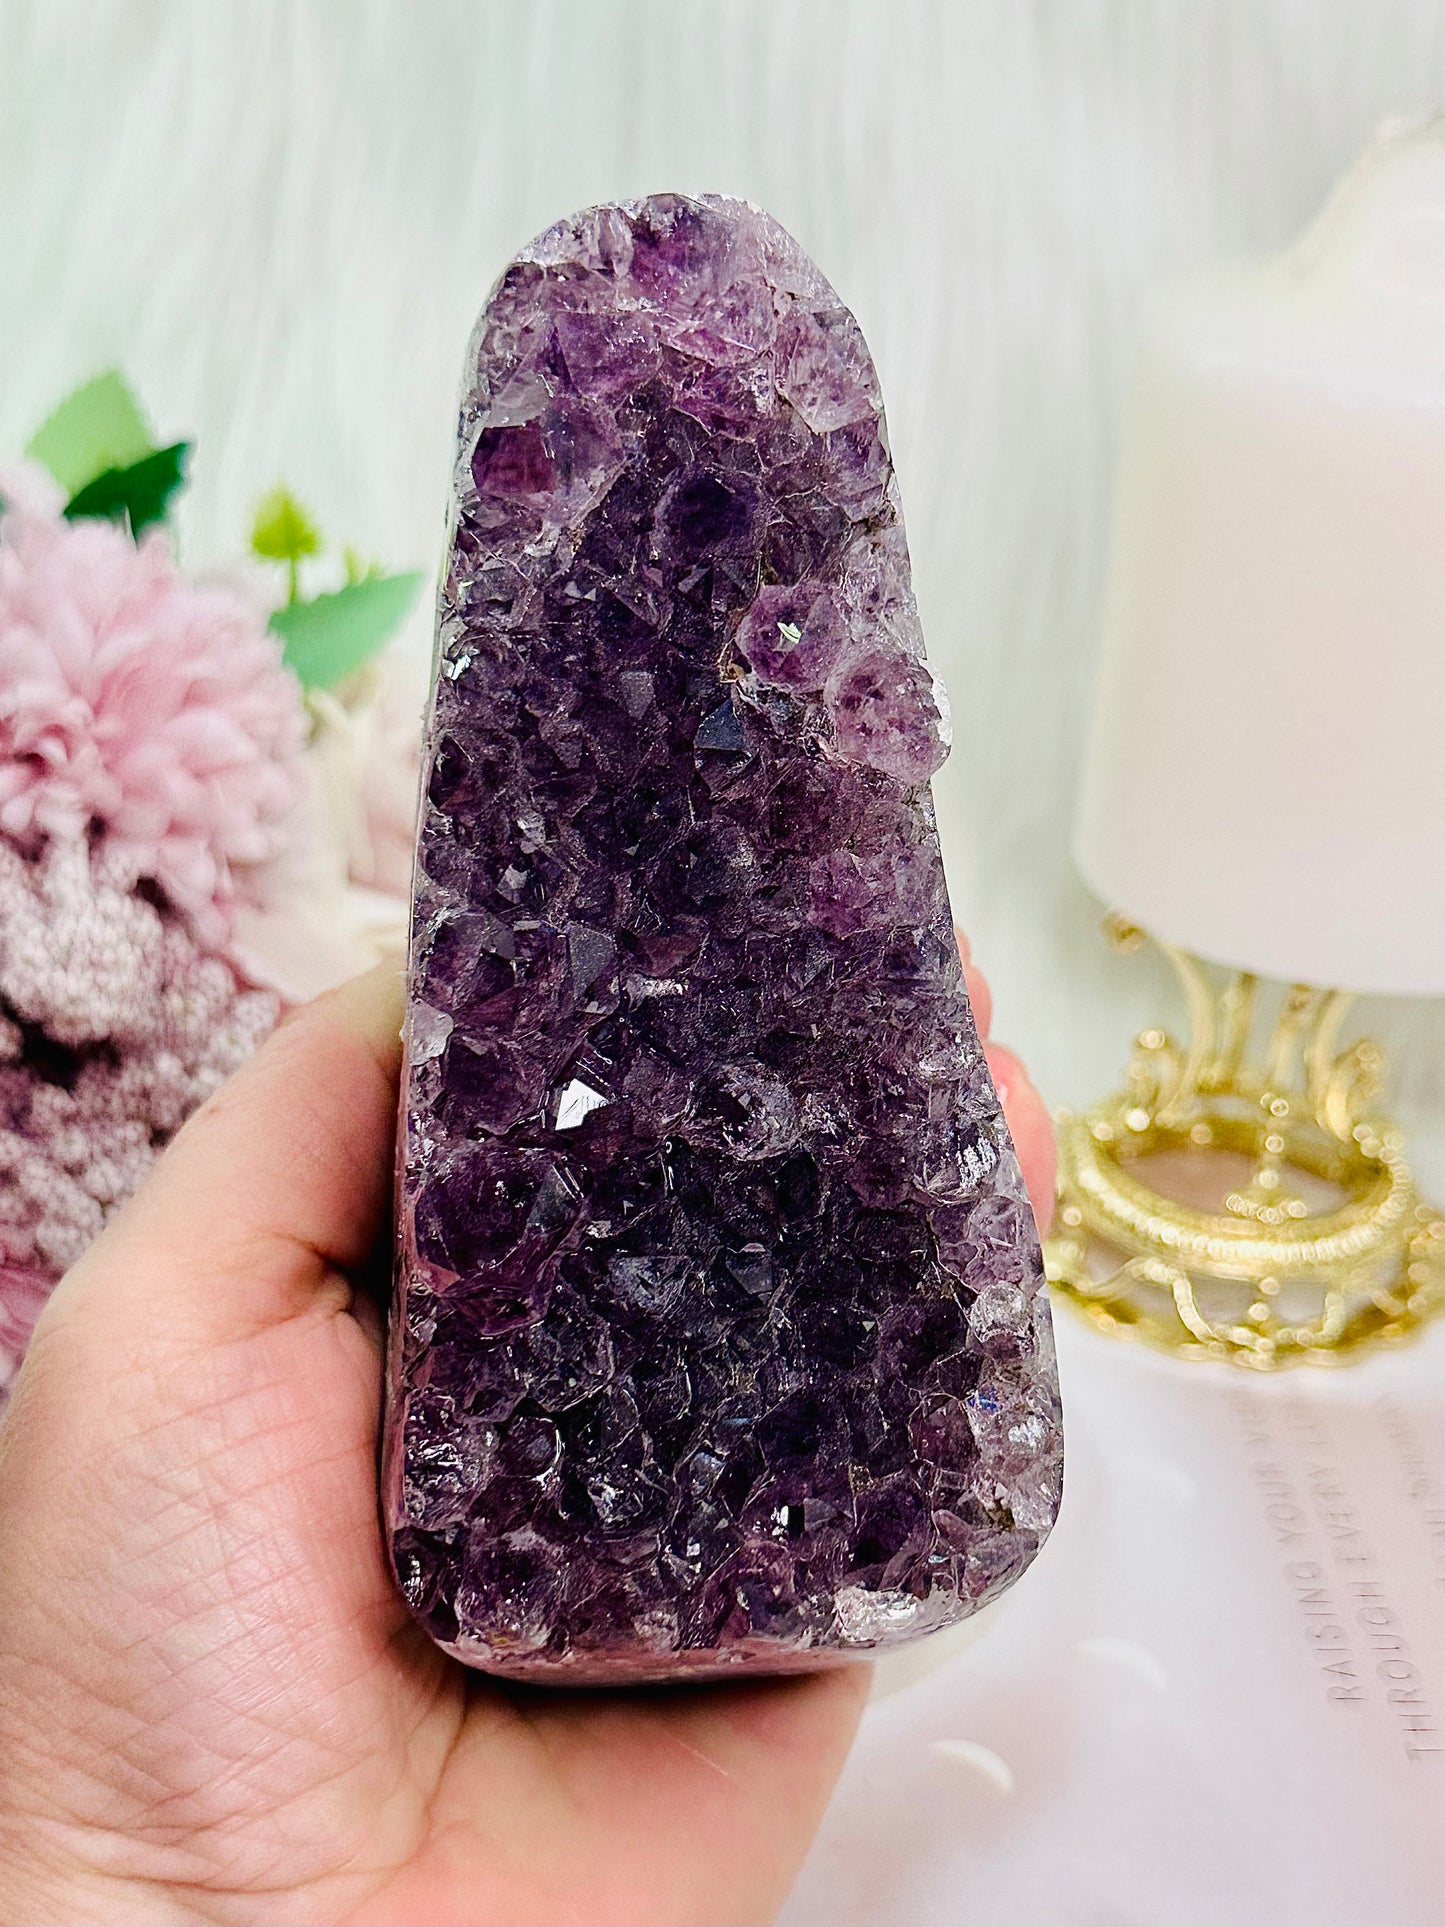 Simply Stunning Chunky 637gram Amethyst Agate Cluster From Brazil Just Gorgeous